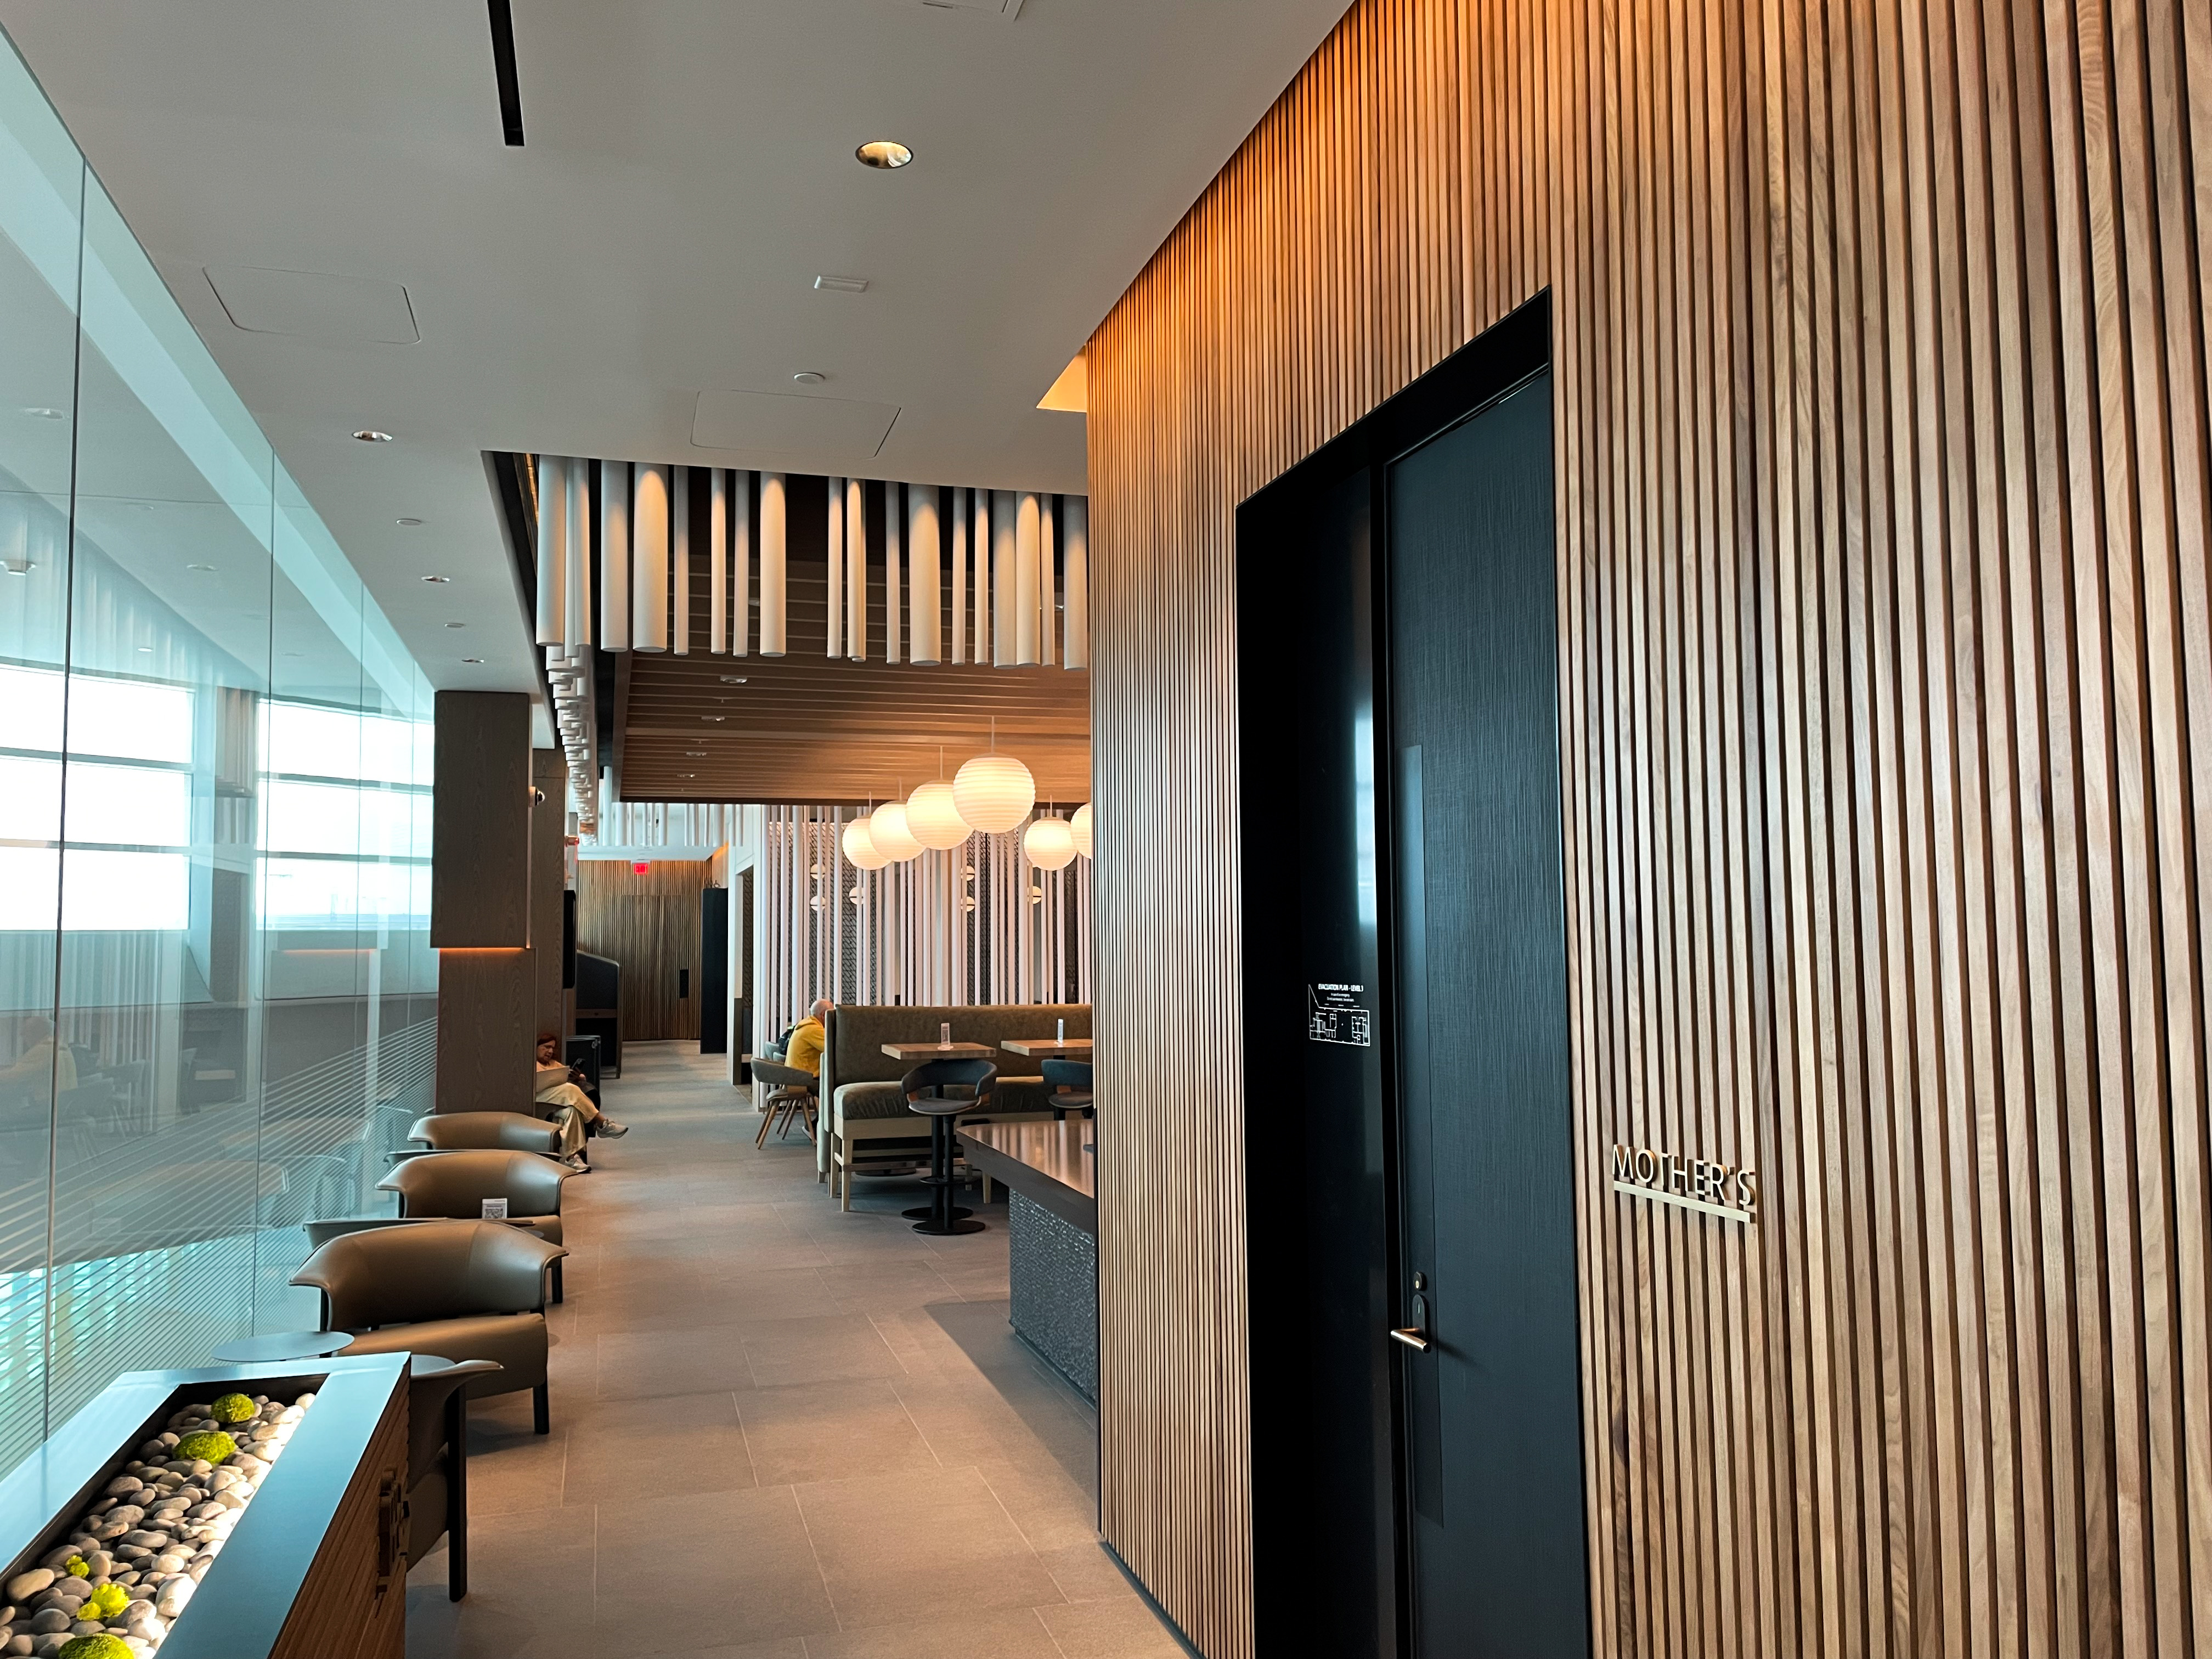 One of the main corridors leading to the bar and snack buffet at the Washington National Concourse E Admirals Club. The lounge utilizes elegant wood accents and features a warm and inviting color scheme.